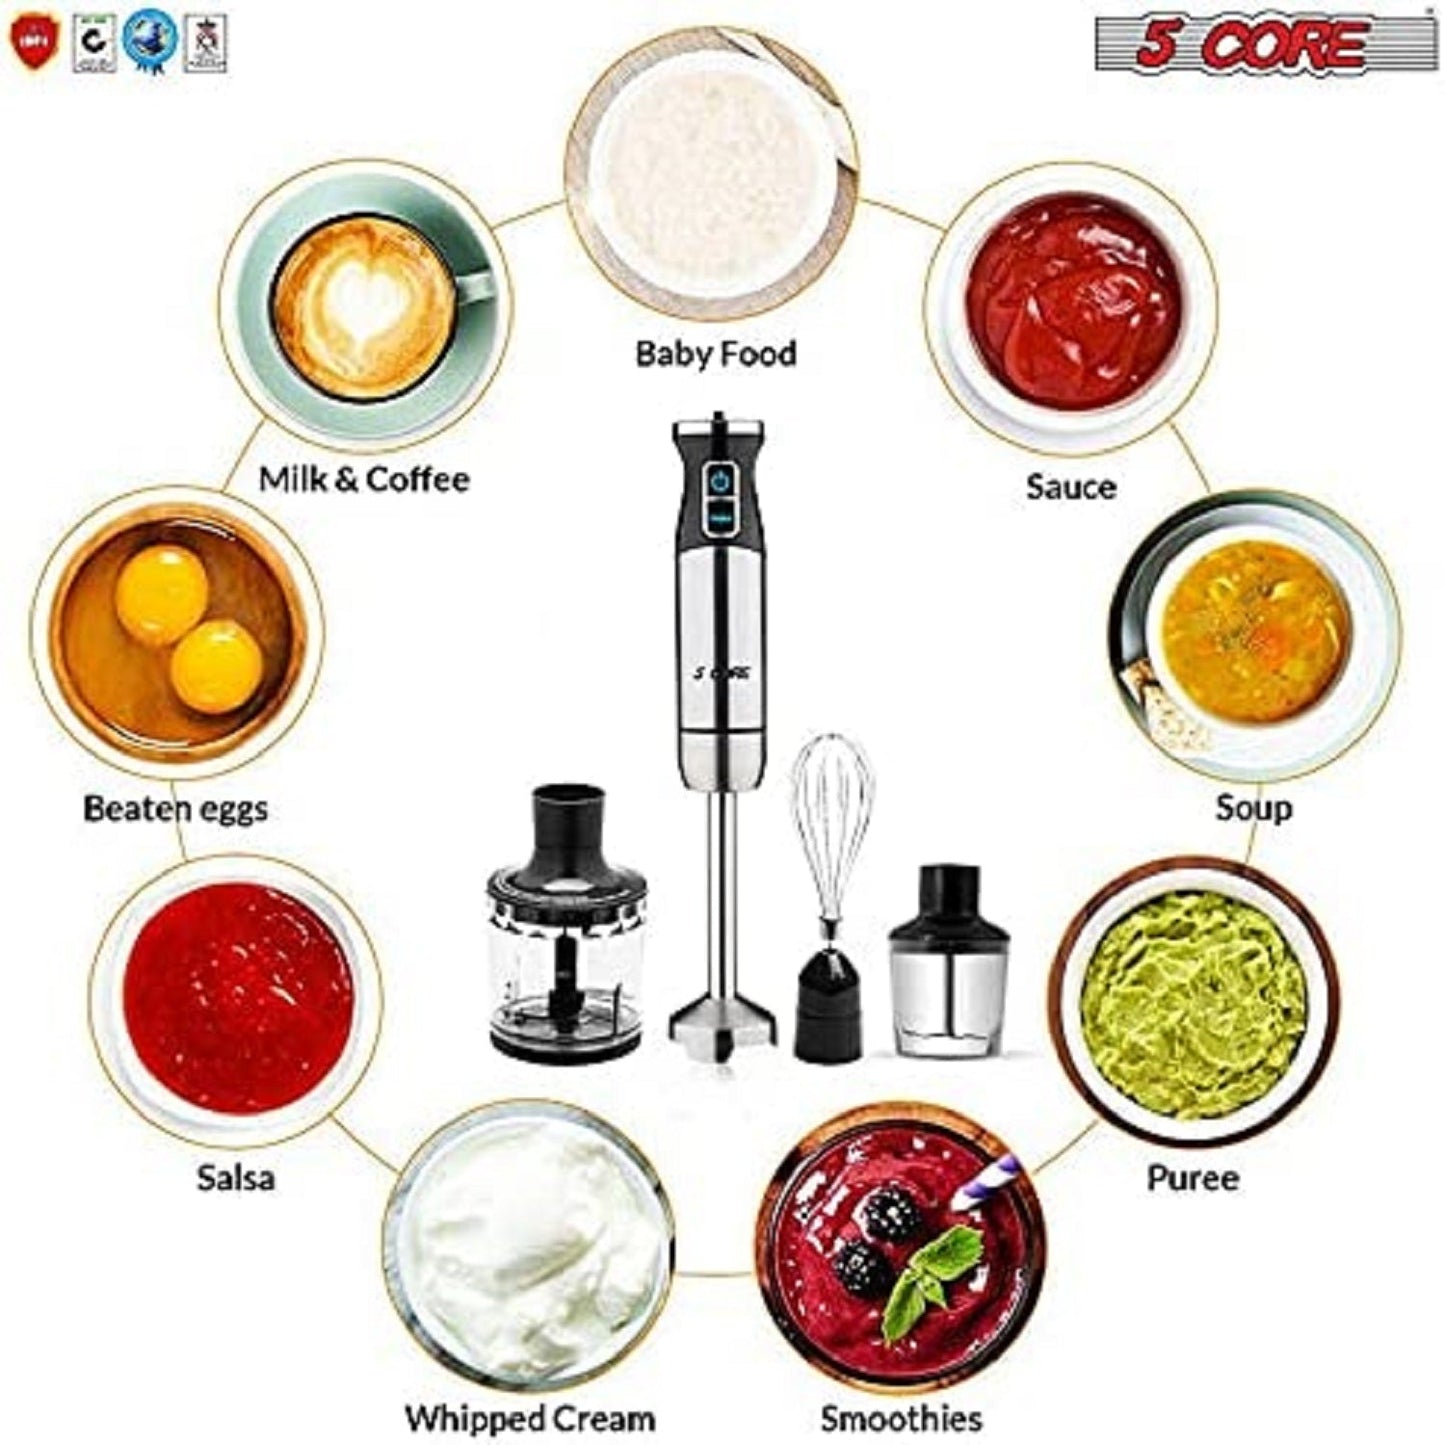 5 Core 5-in-1 Immersion Hand Blender, Powerful 500W Motor- 8 Speed Handheld Stick Blender with 304 Stainless Steel Blades, BPA-Free Milk Frother, Smoothies, Egg Whisk, Puree Infant Food, Sauces and Soups HB 1520-1